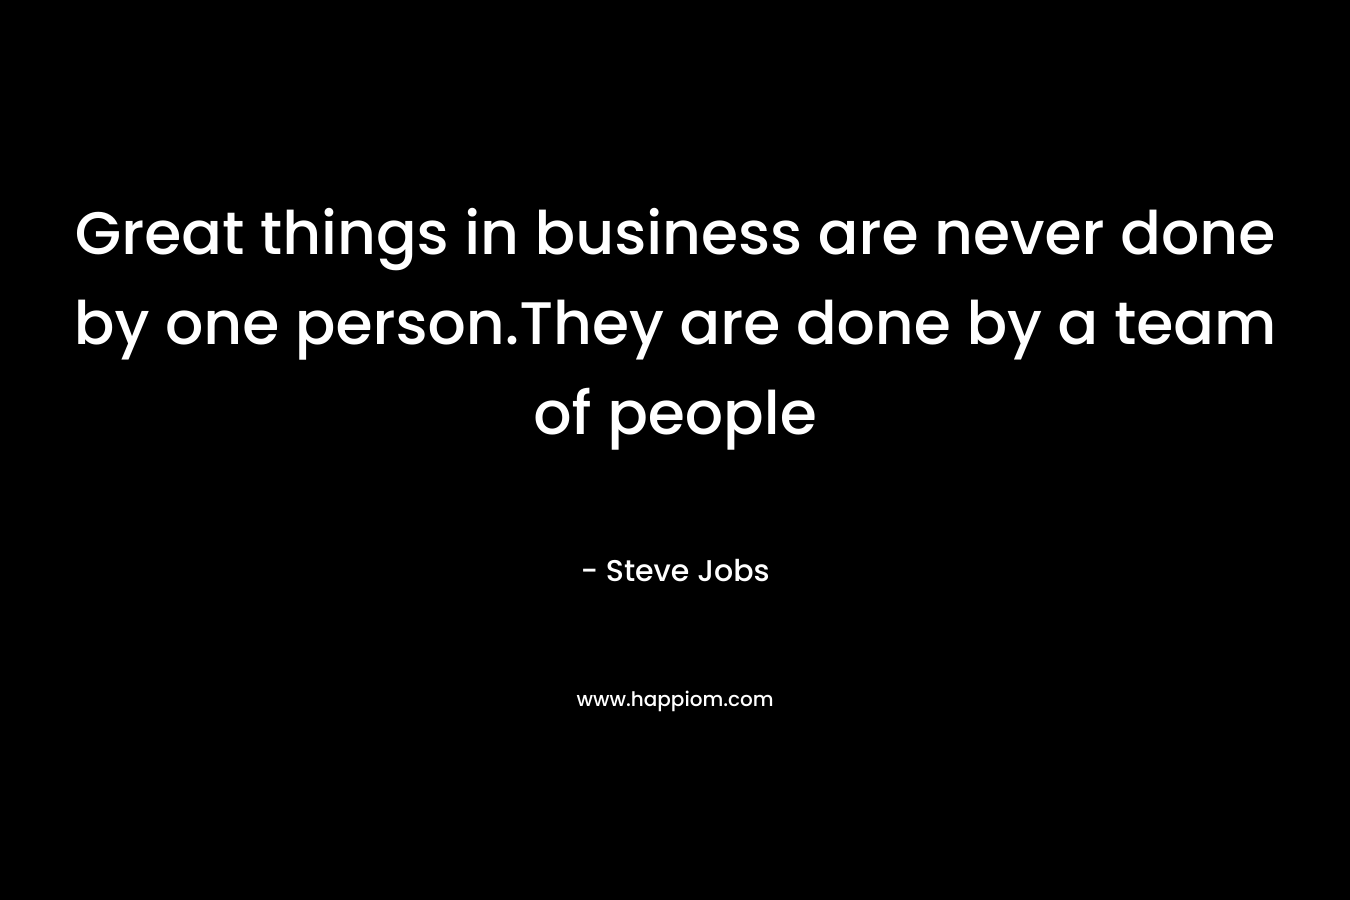 Great things in business are never done by one person.They are done by a team of people